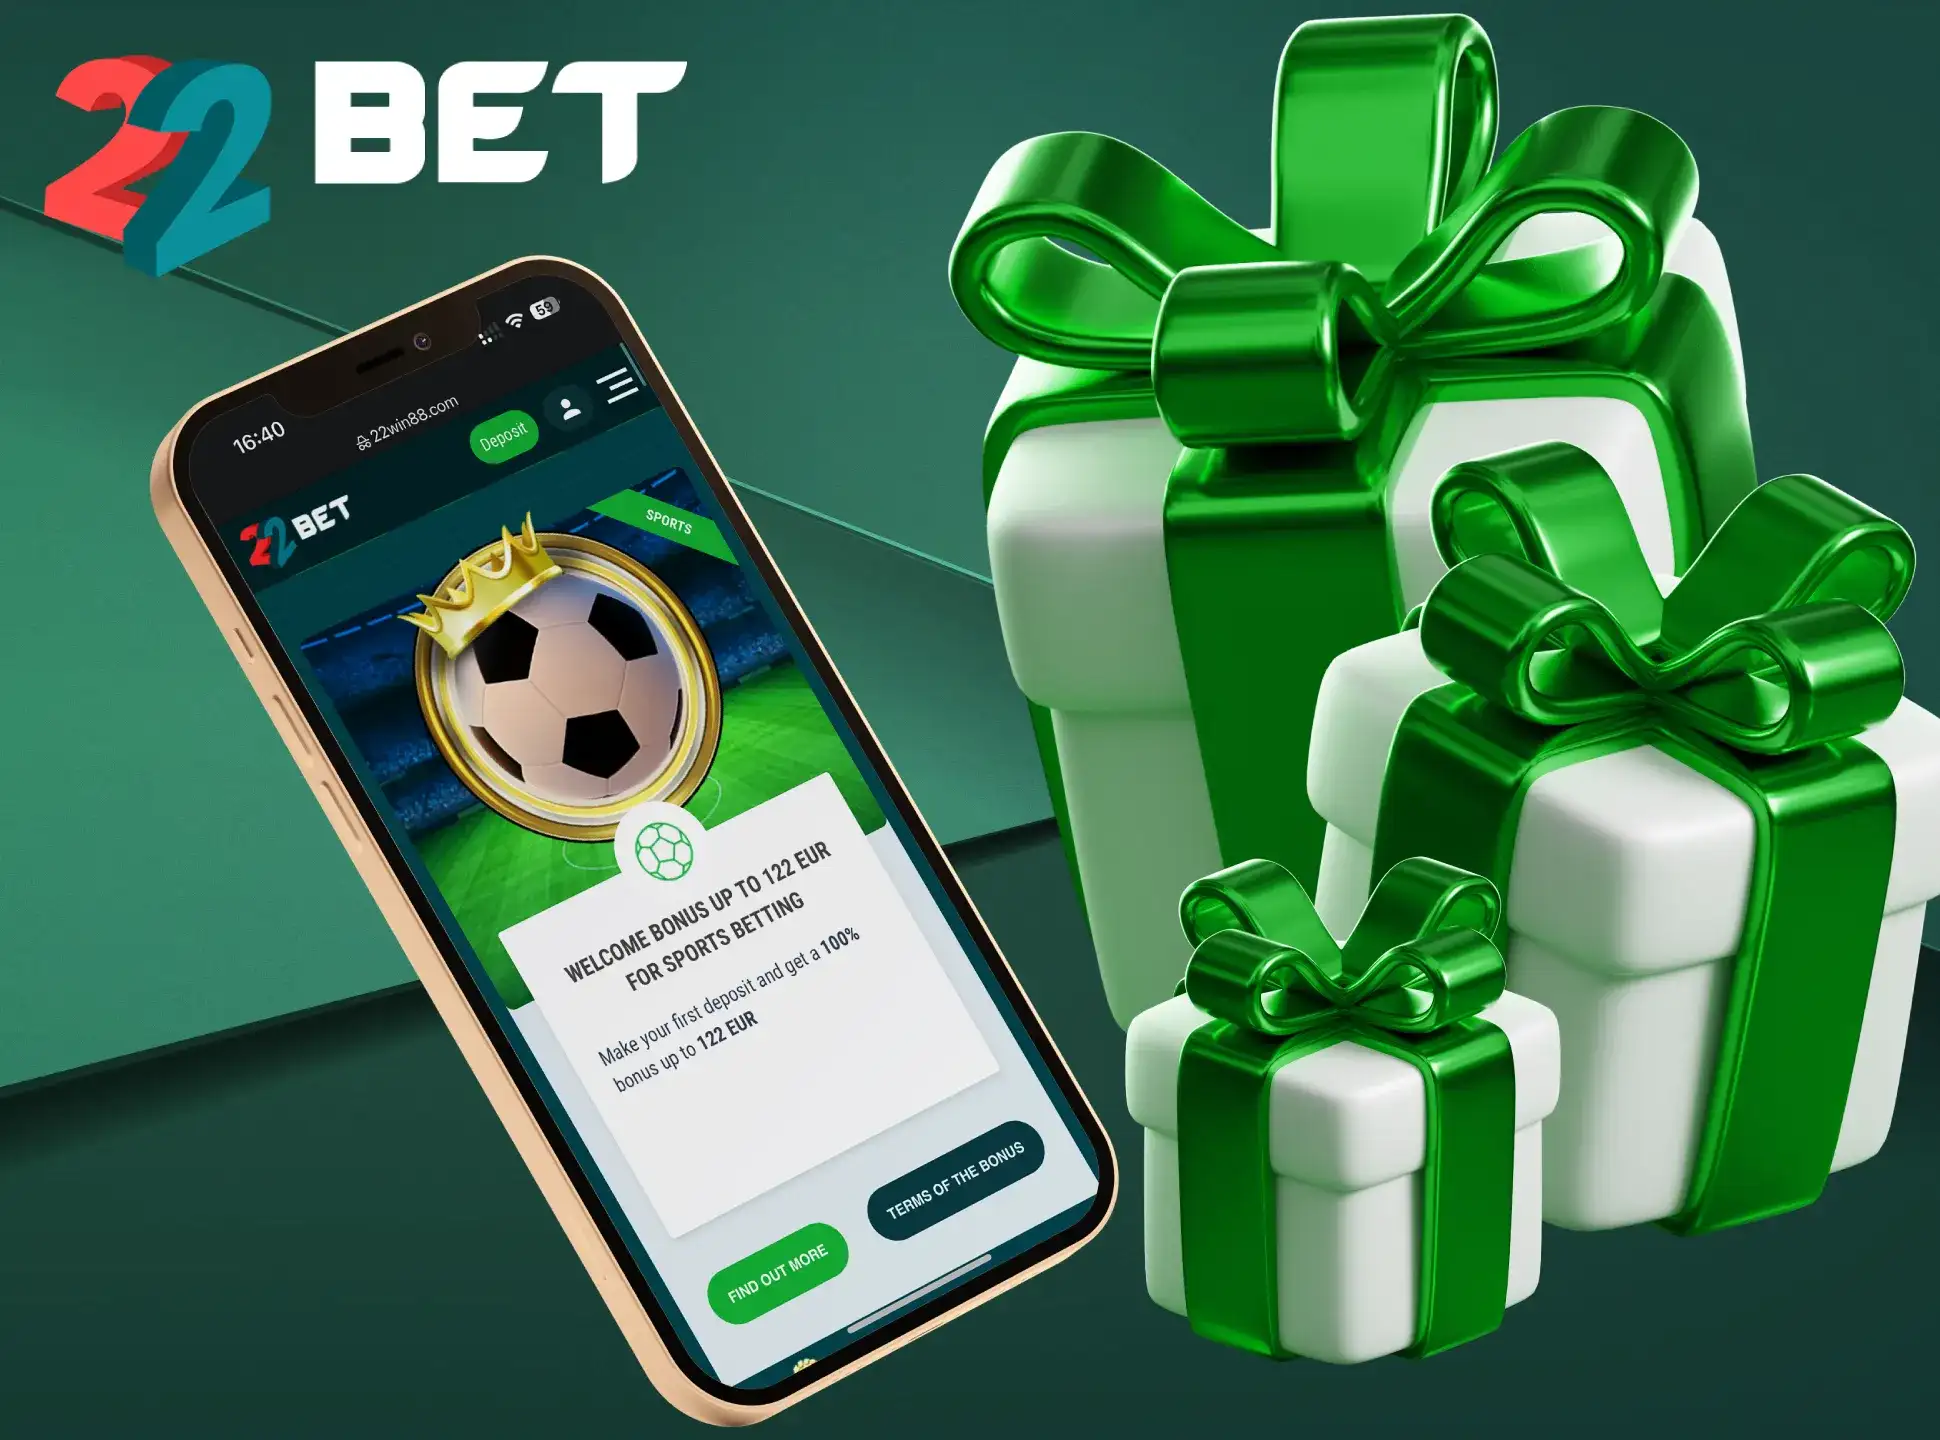 Welcome sports and casino bonuses on the 22Bet app for newcomers.